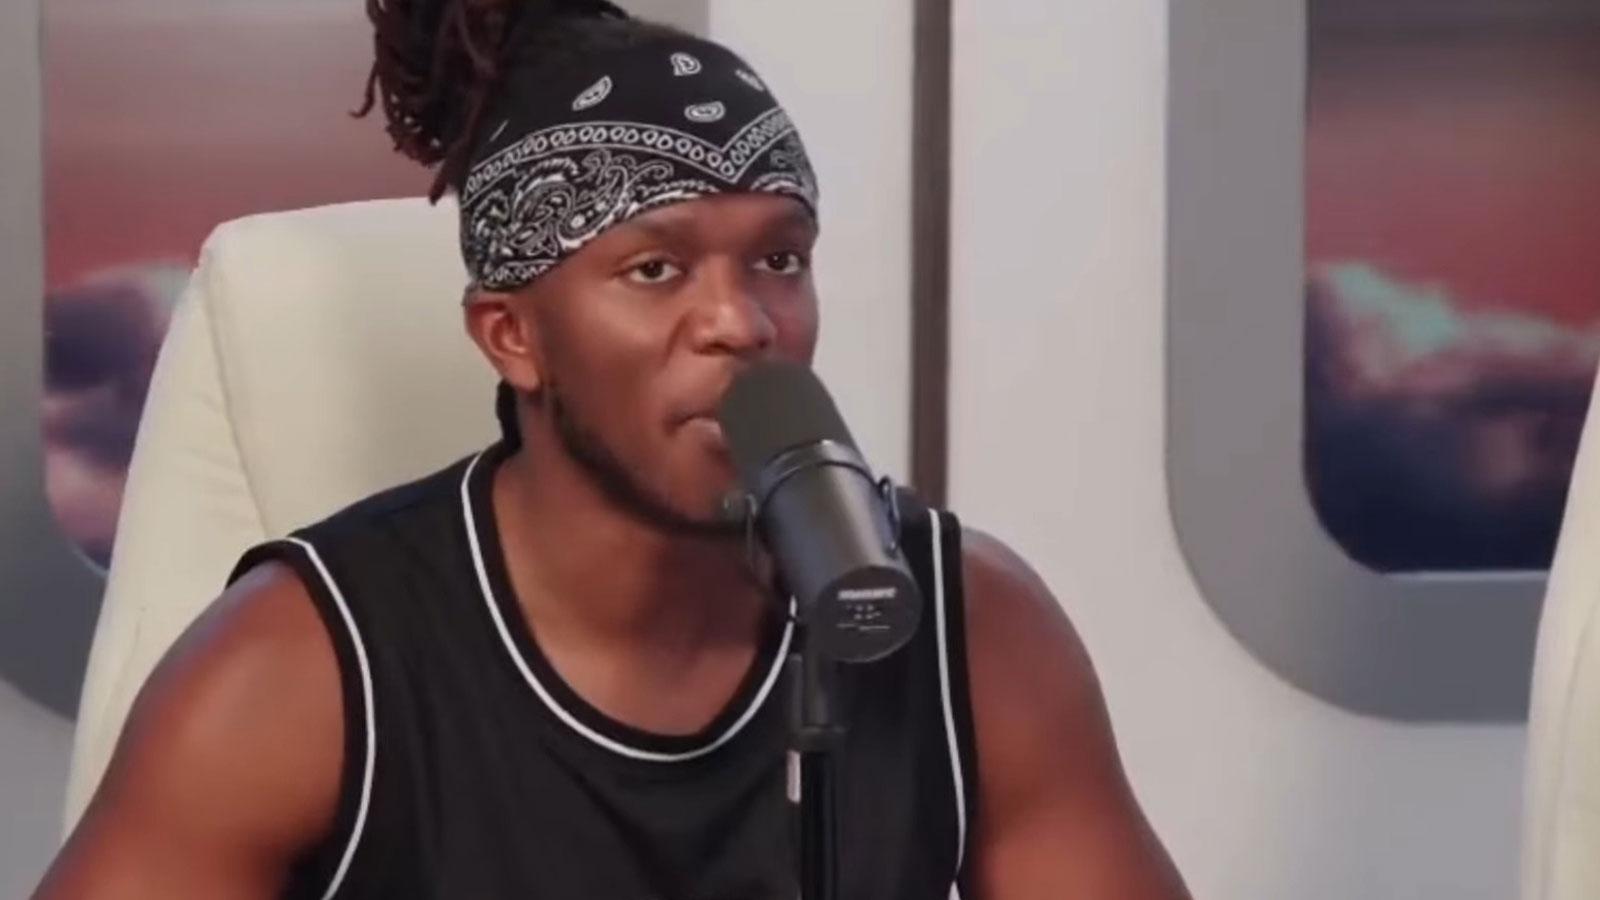 KSI speaking into microphone on SideCast set